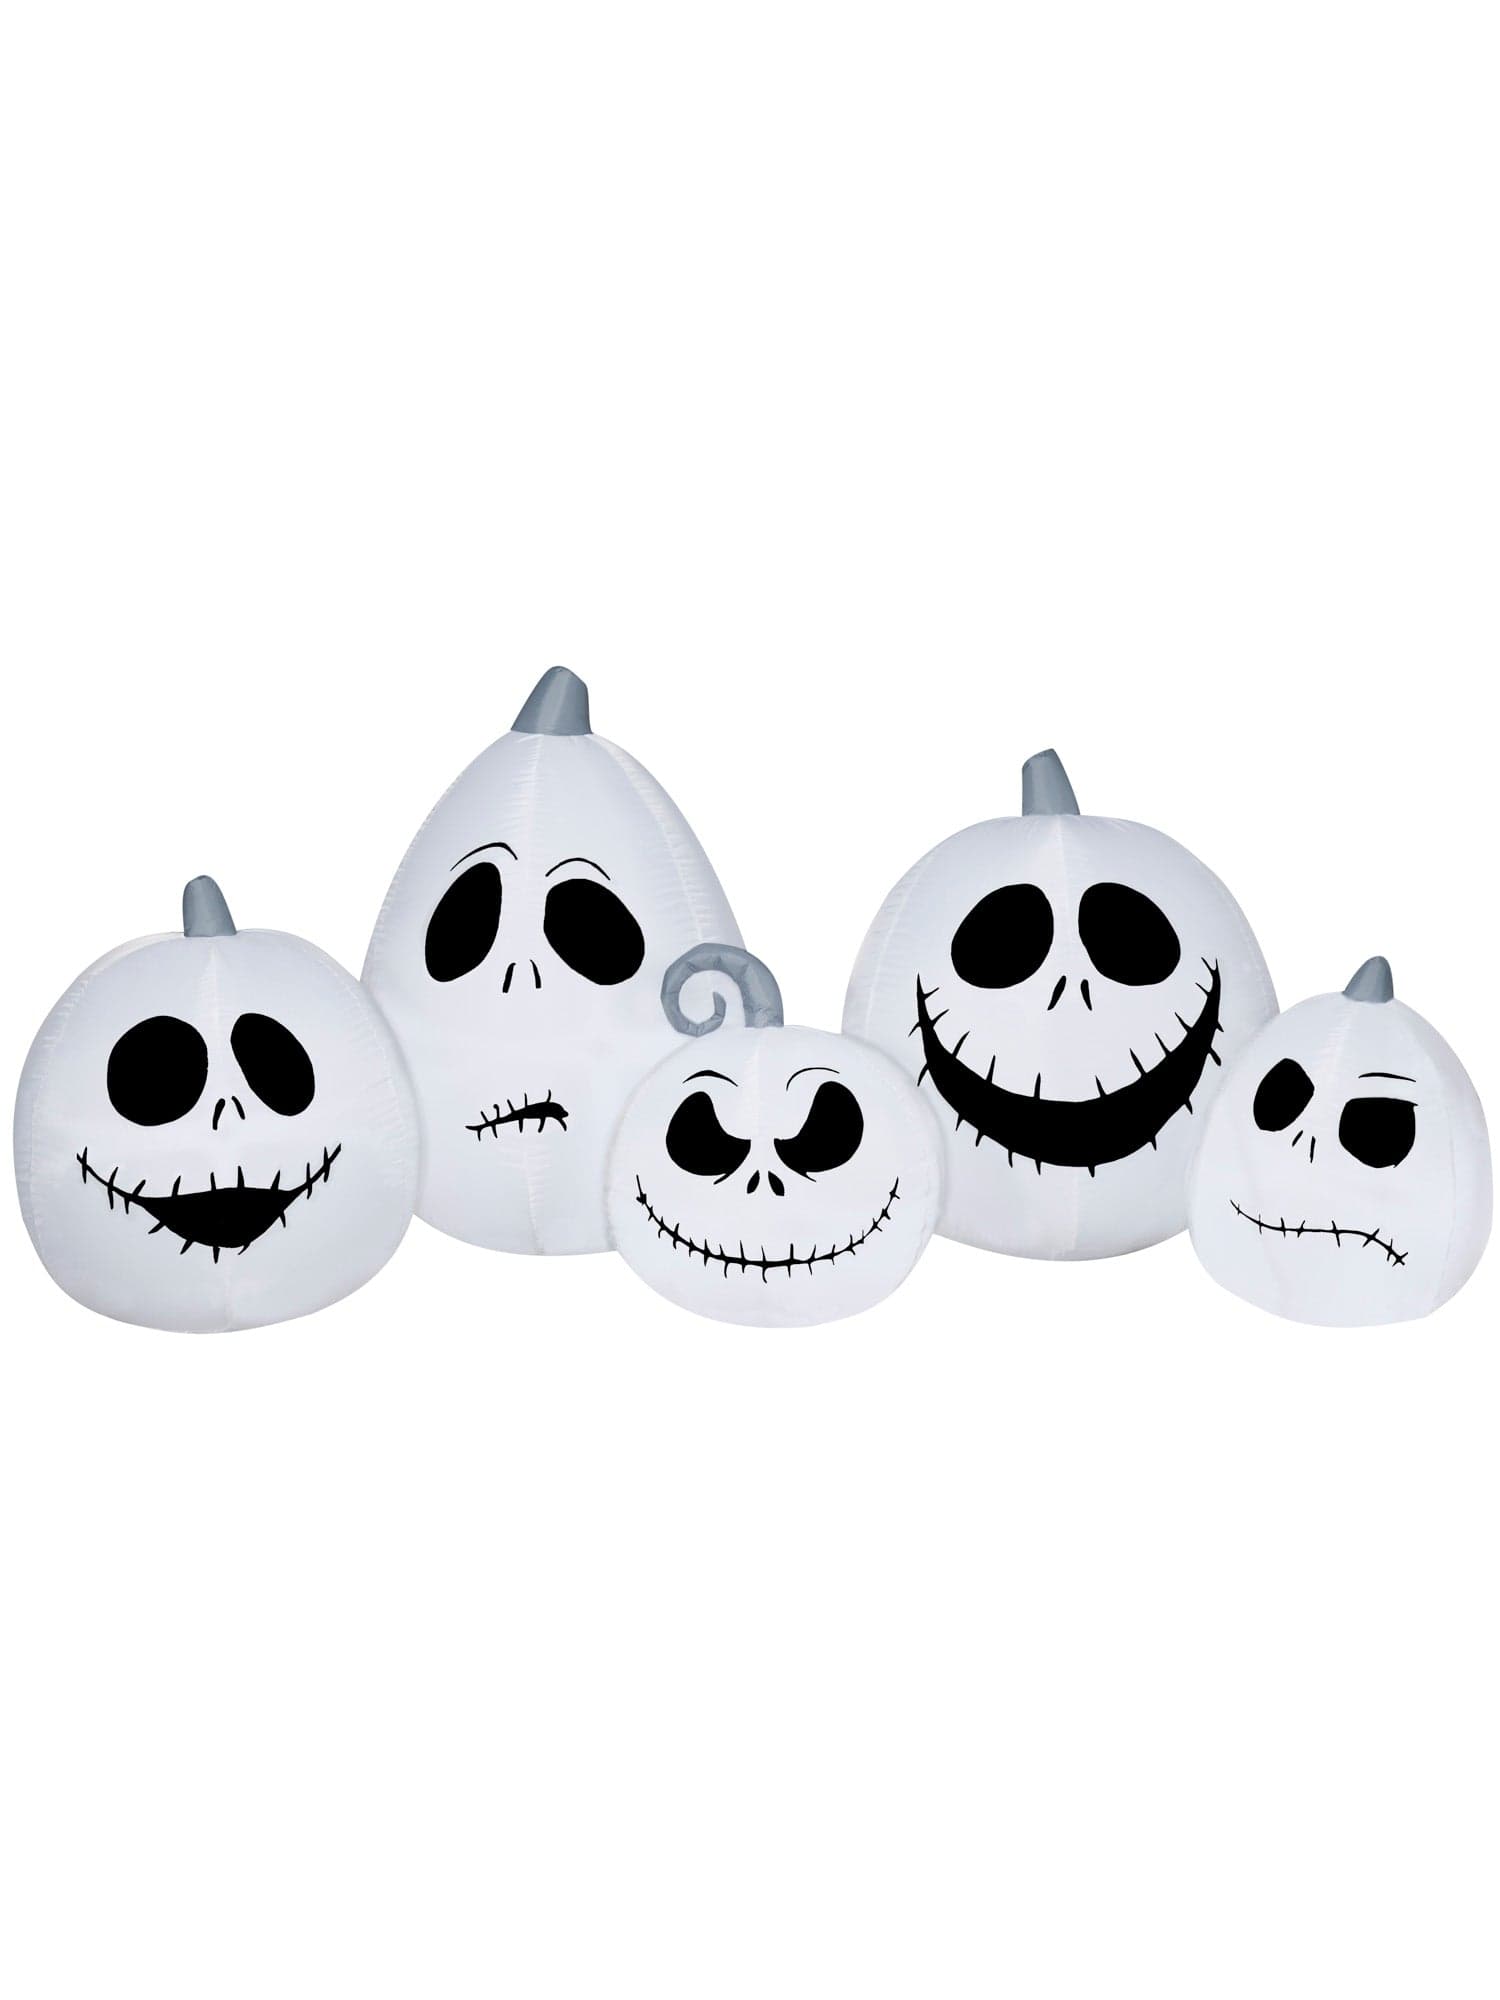 7.5 Foot The Nightmare Before Christmas Jack Skellington Pumpkin Faces Light Up Halloween Inflatable Lawn Decor - costumes.com